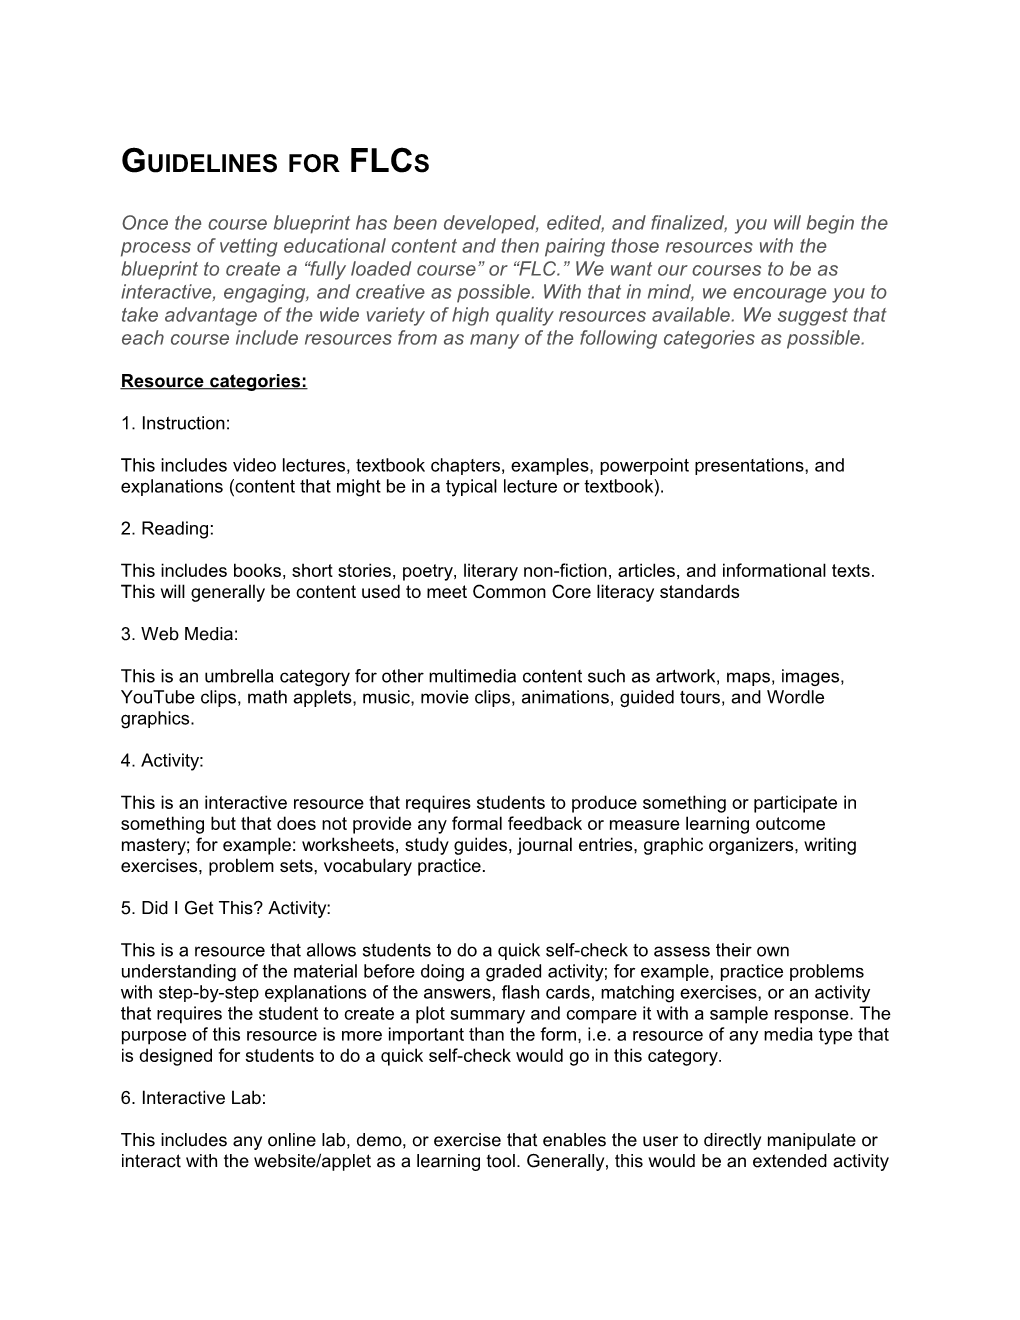 Updated FLC Guidelines